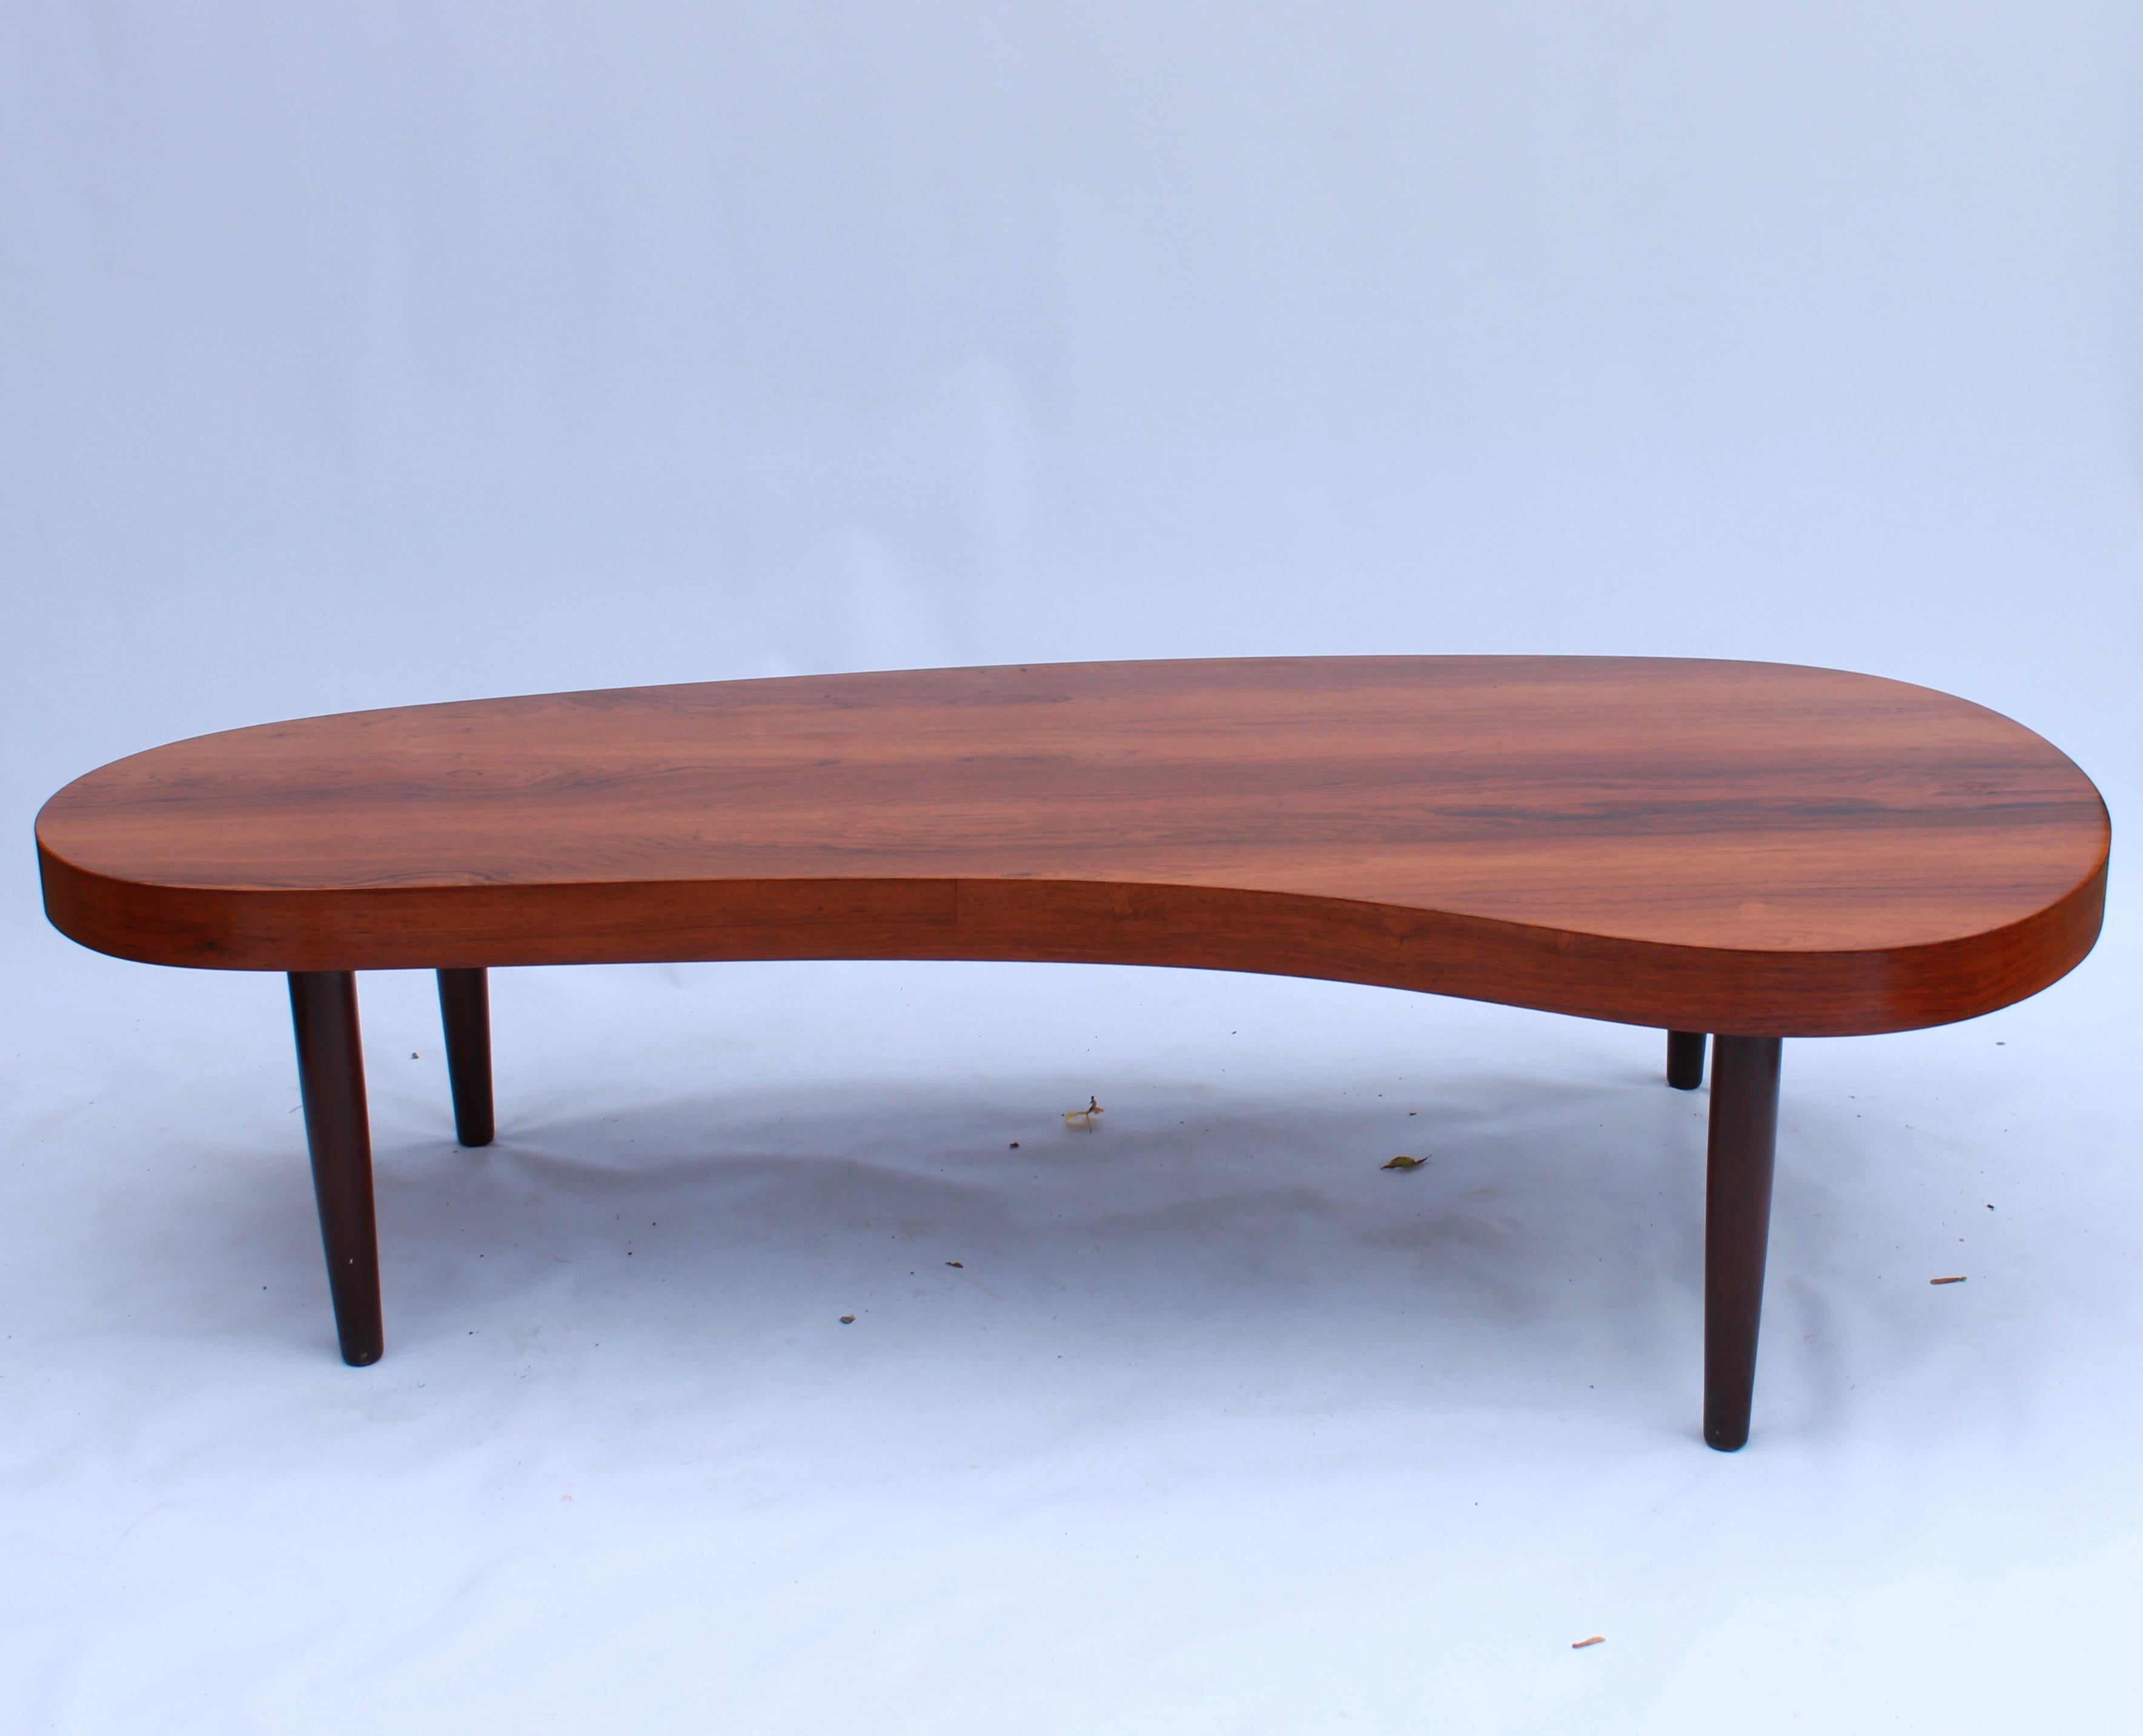 Coffee table in rosewood of Danish design and Danish cabinetmaker from the 1960s. The table is in great vintage condition.